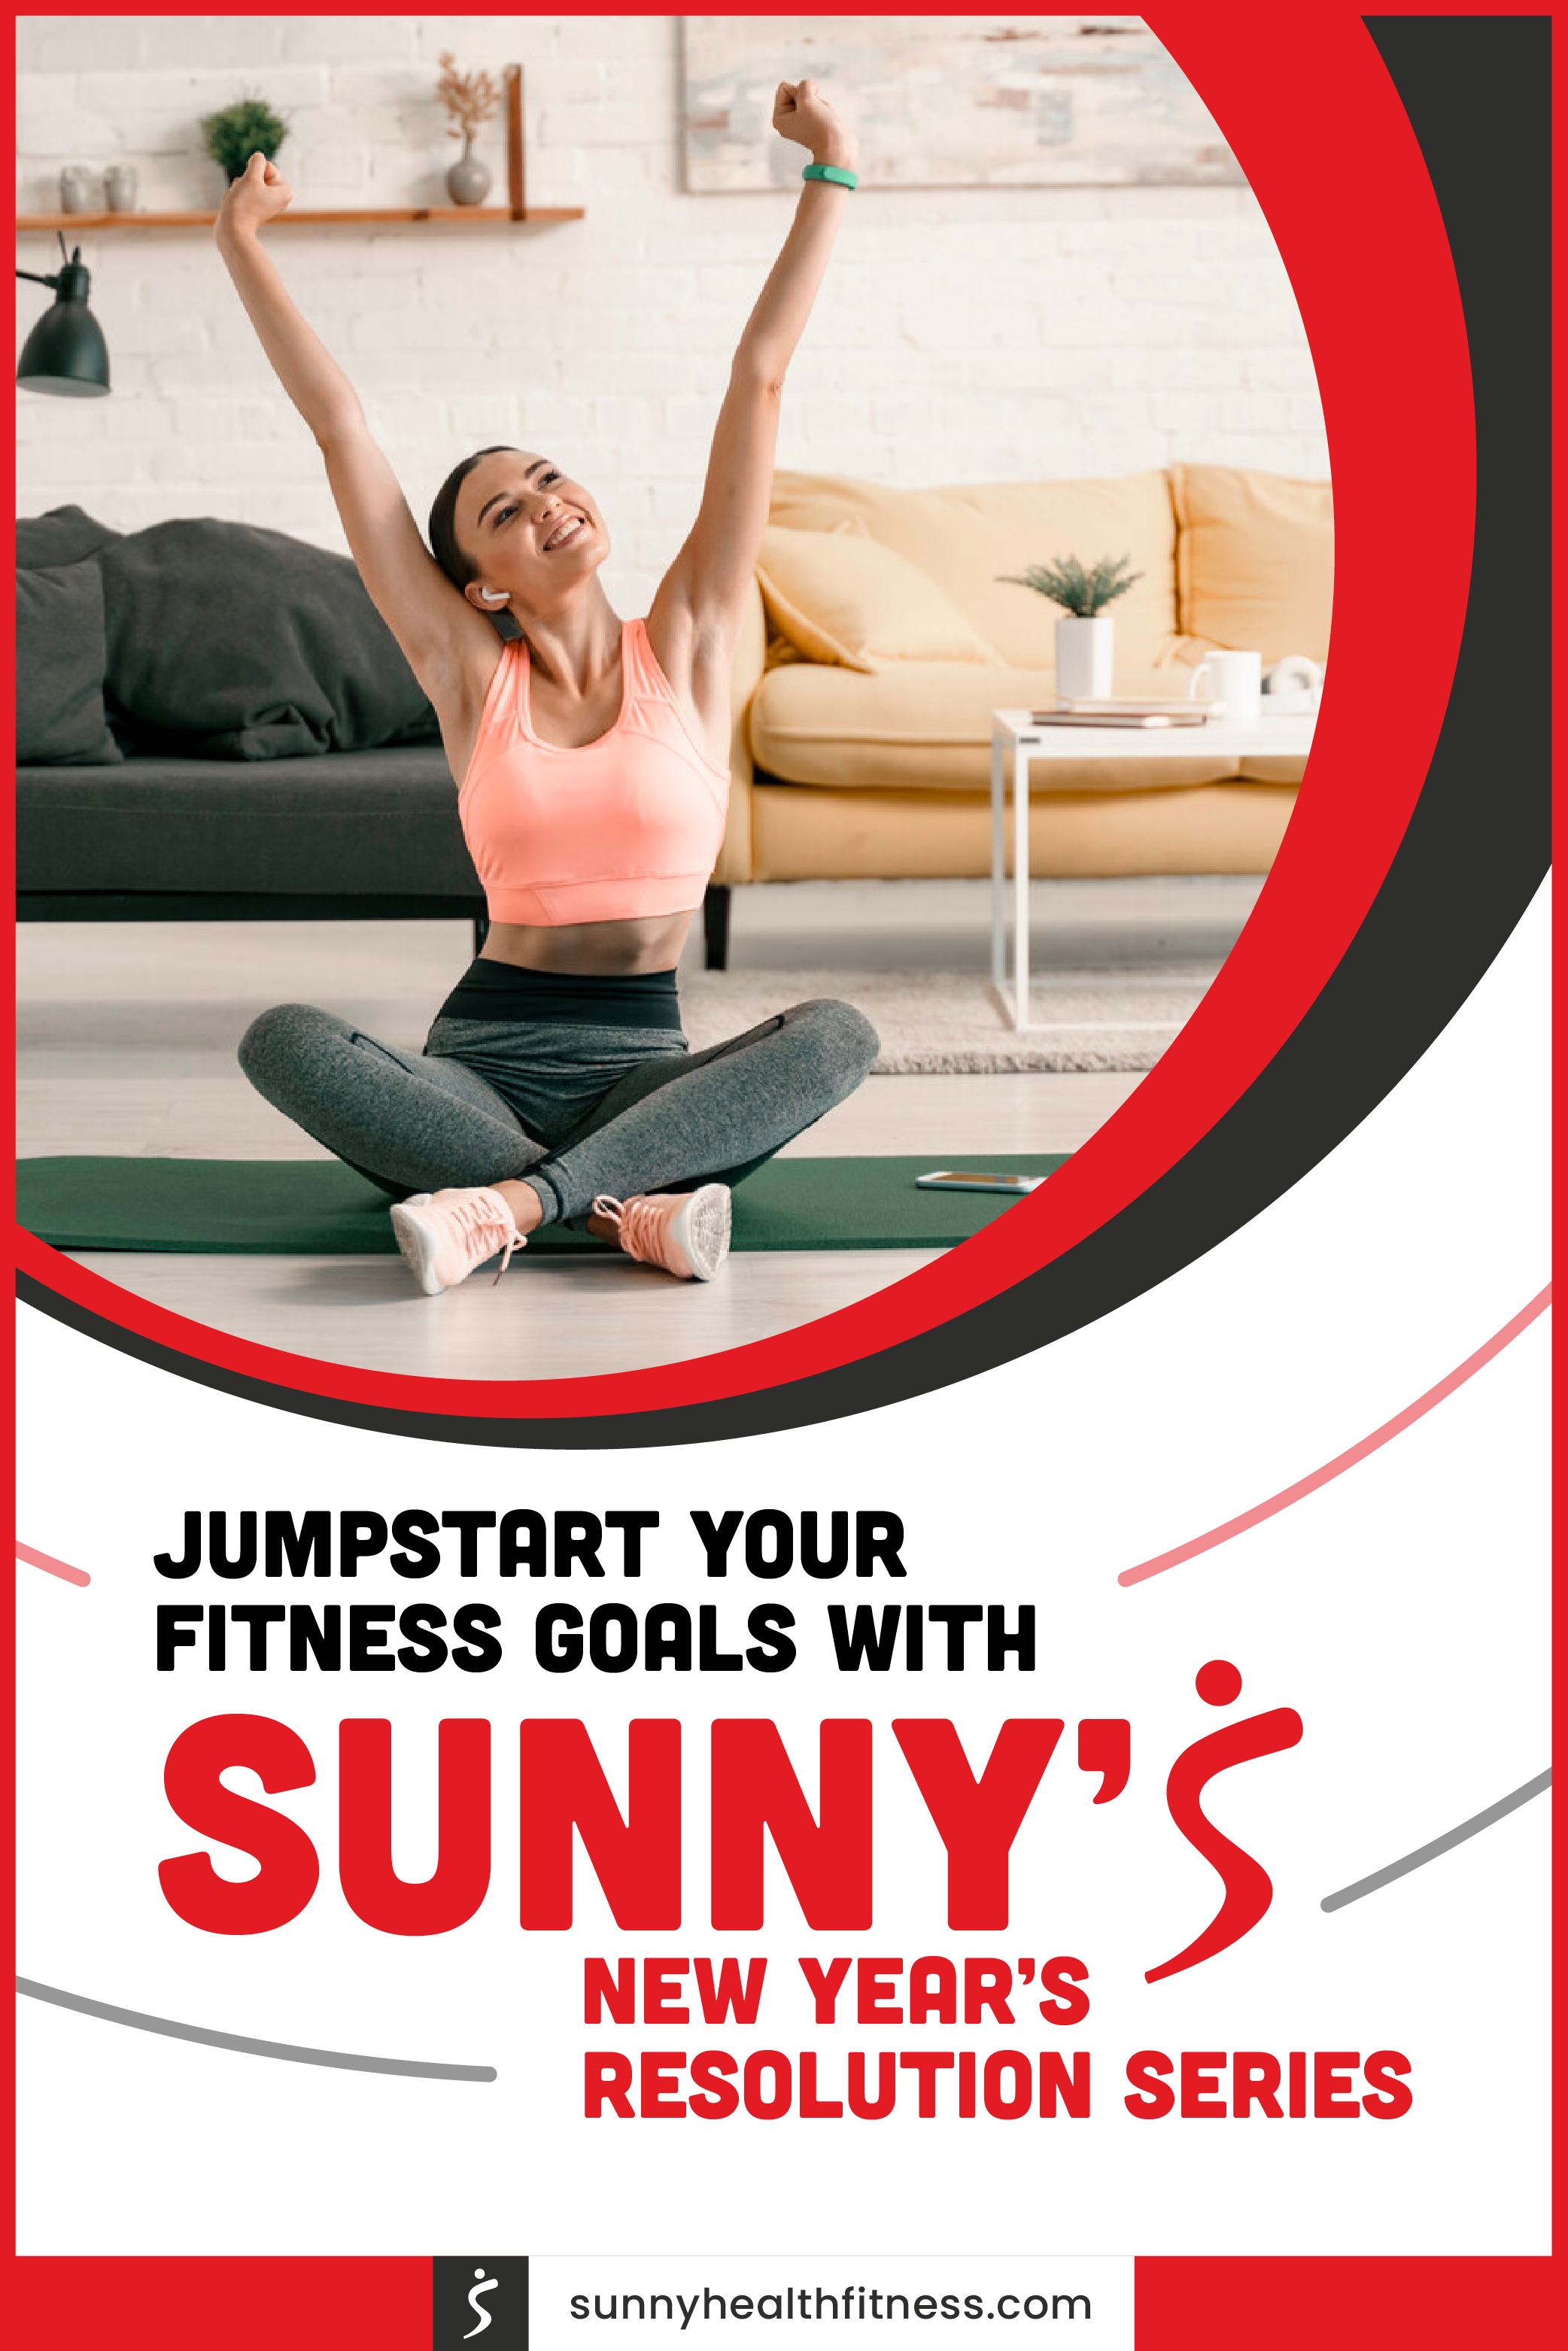 Jumpstart Your Fitness Goals With Sunny’s New Year's Resolution Series Infographic